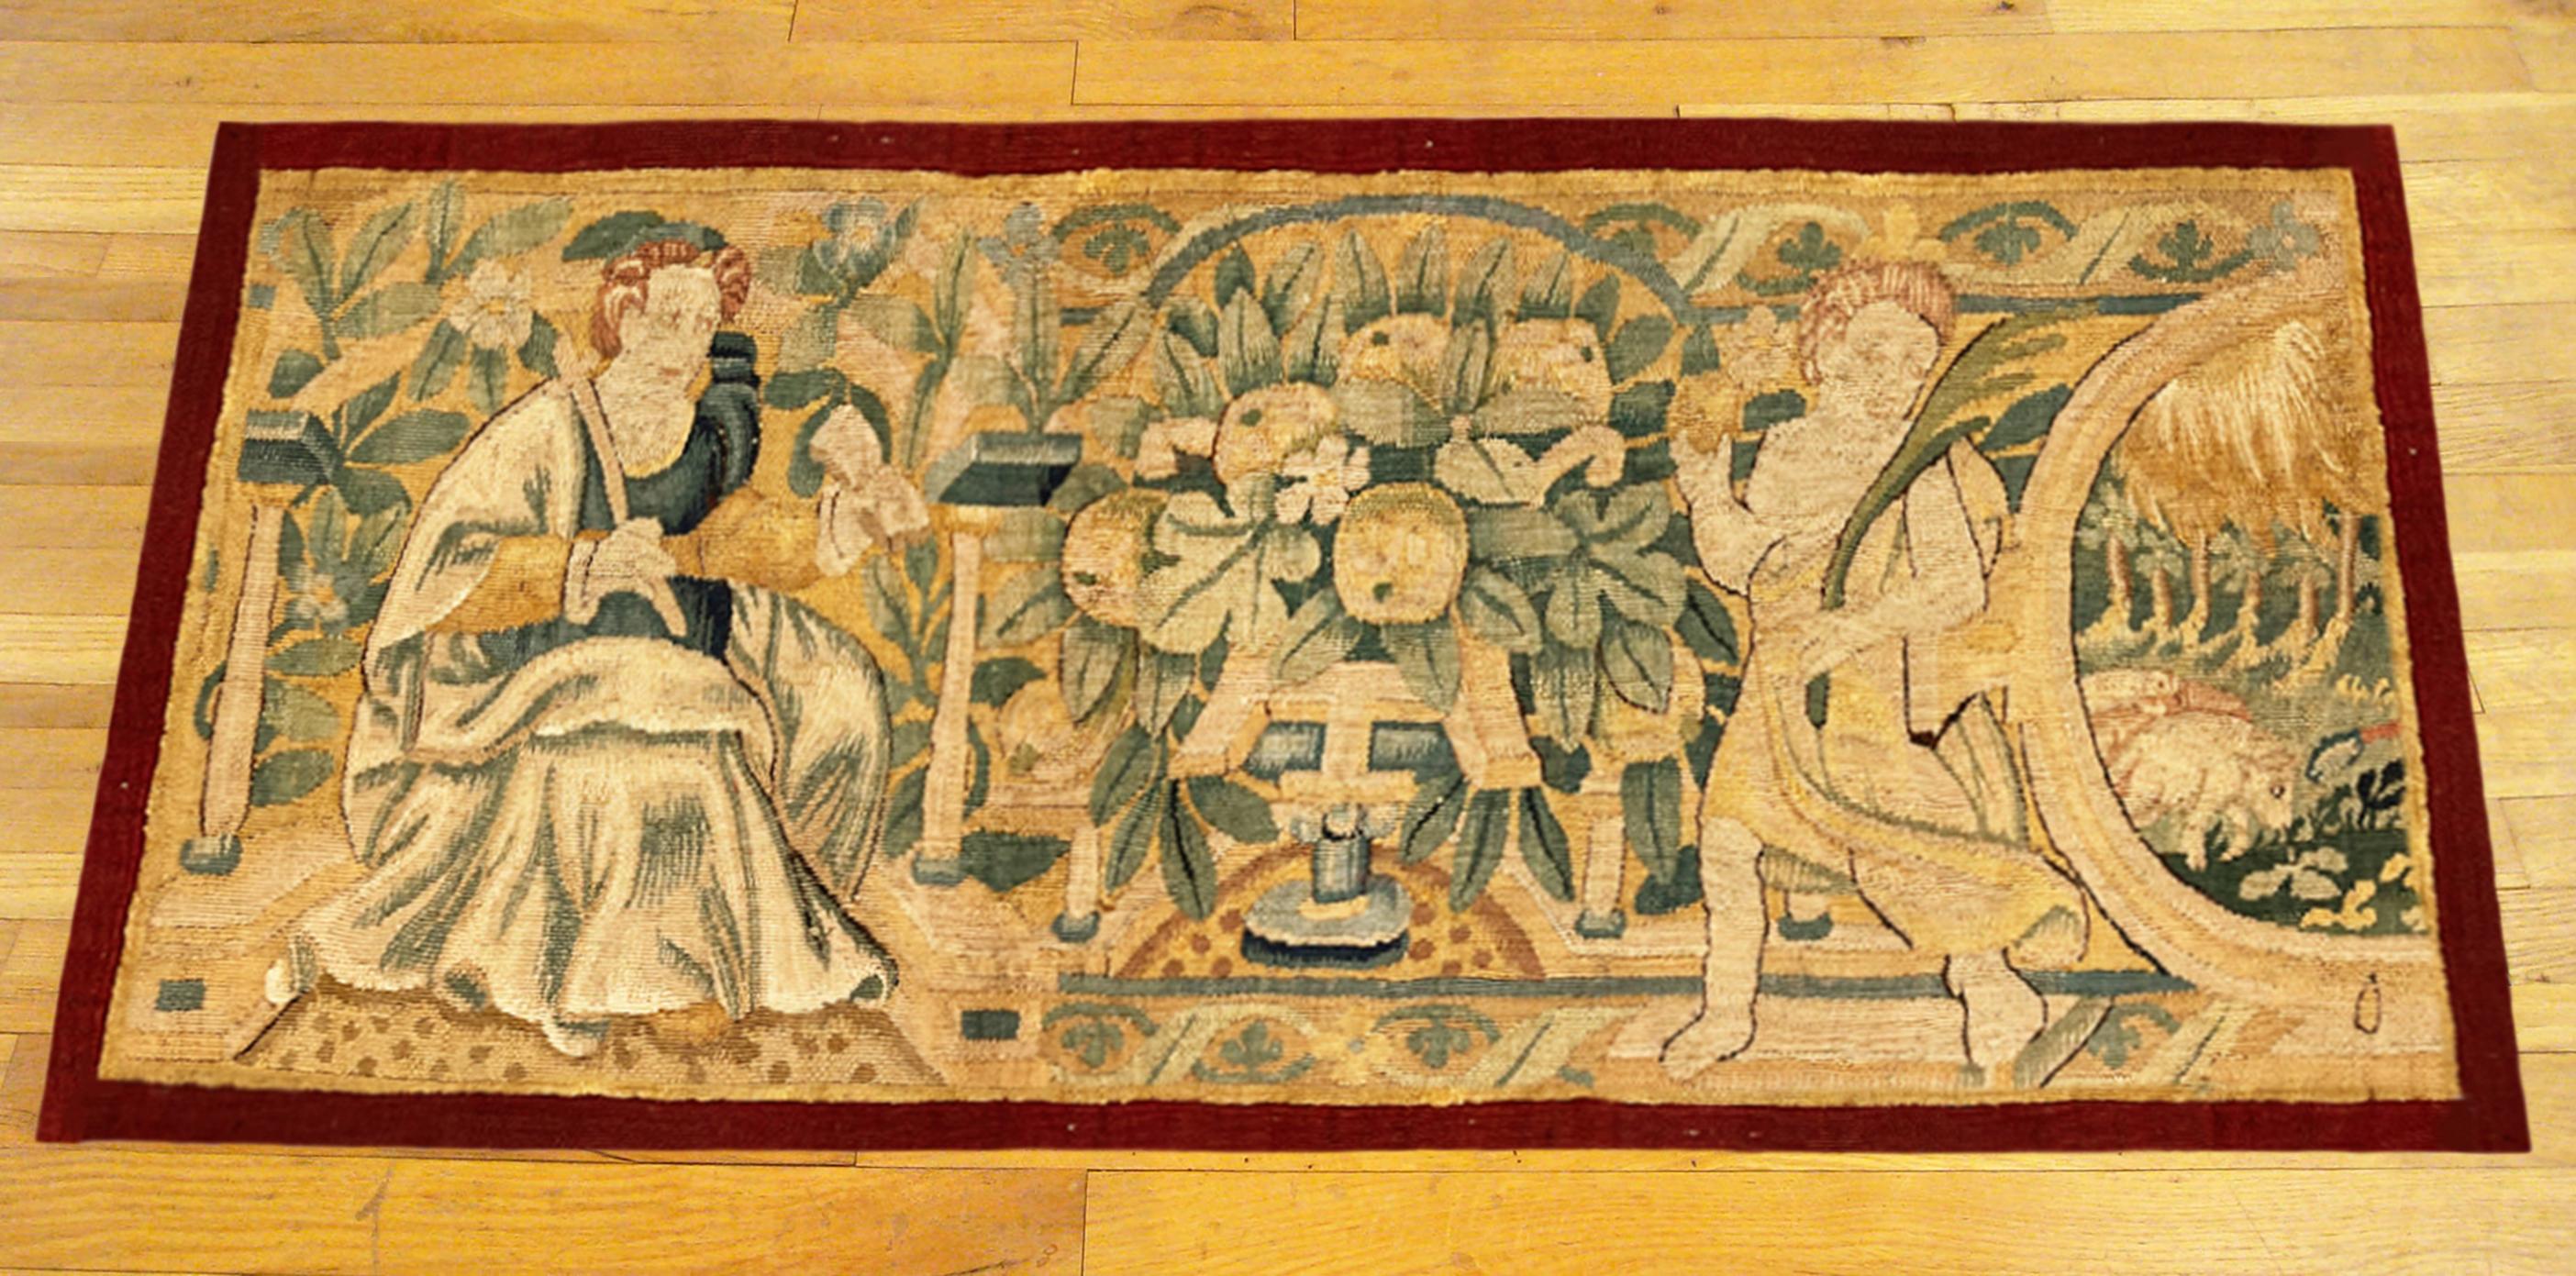 A 17th century flemish historical tapestry panel. This horizontally oriented decorative tapestry panel depicts a regal female figure at left, with a floral reserve at center, and with a mythological angelic figure at right. The central area is